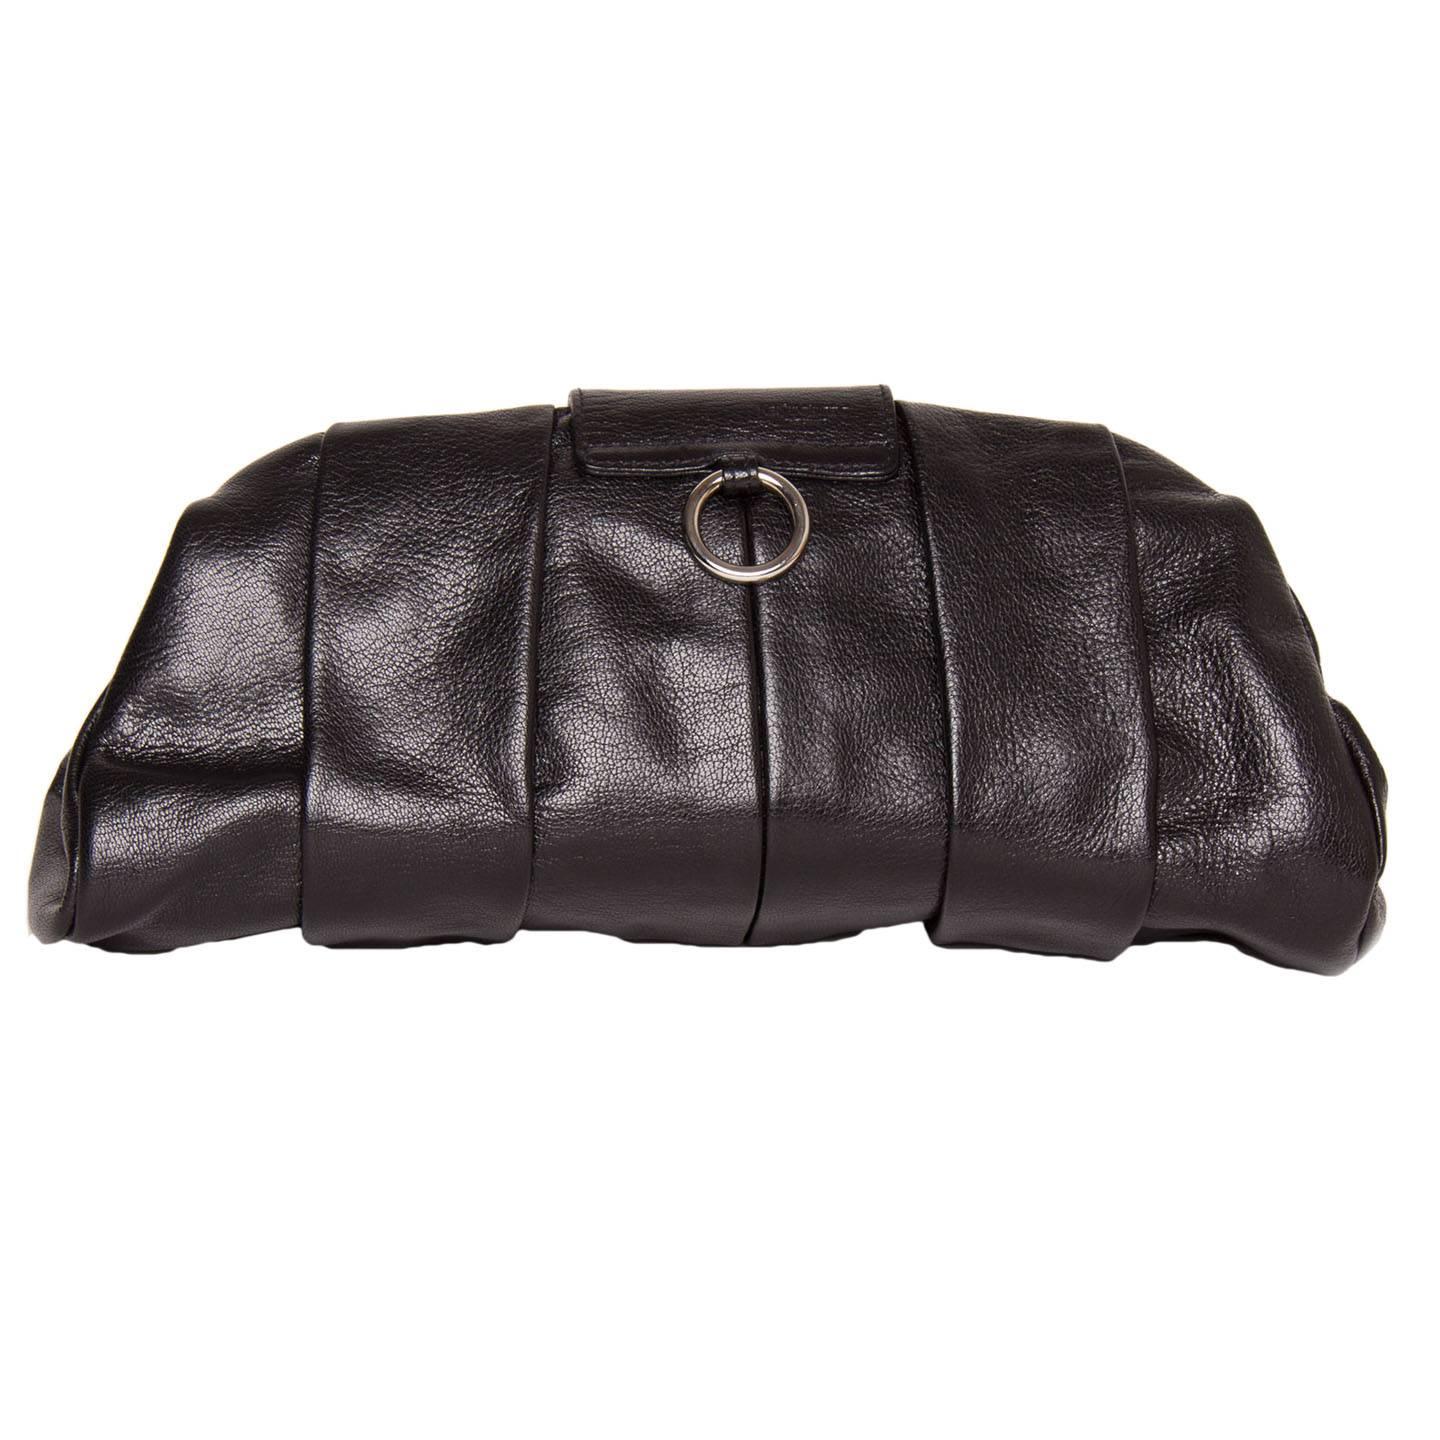 Black leather pleated clutch bag with black and silver enamel kissing lips clasp closure. The silver ring detail at the back is to hold the bag. The interior is made of black suede. Made in France. 
Designer: Tom Ford

Size  H 5" L 11" W